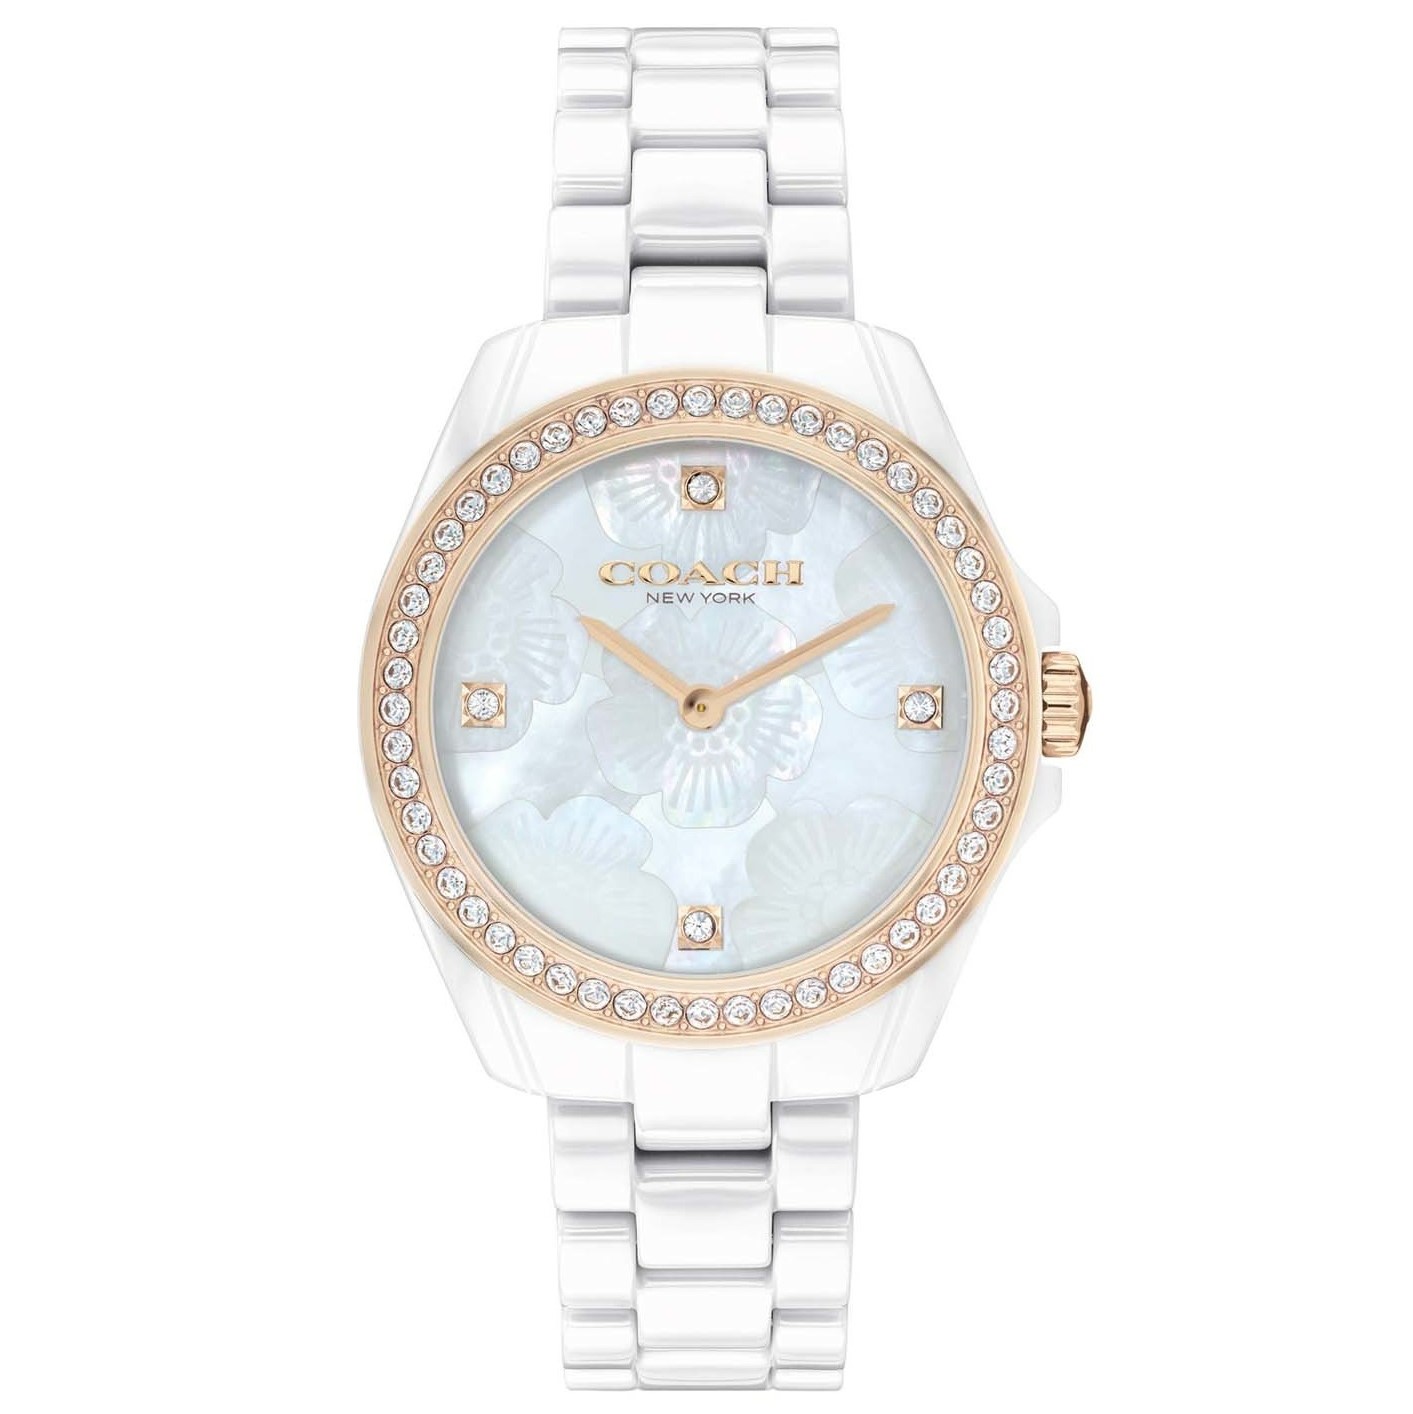 ĐỒNG HỒ NỮ COACH WOMENS 33.25 MM PRESTON MOTHER OF PEARL DIAL STAINLESS STEEL ANALOGUE WATCH 2